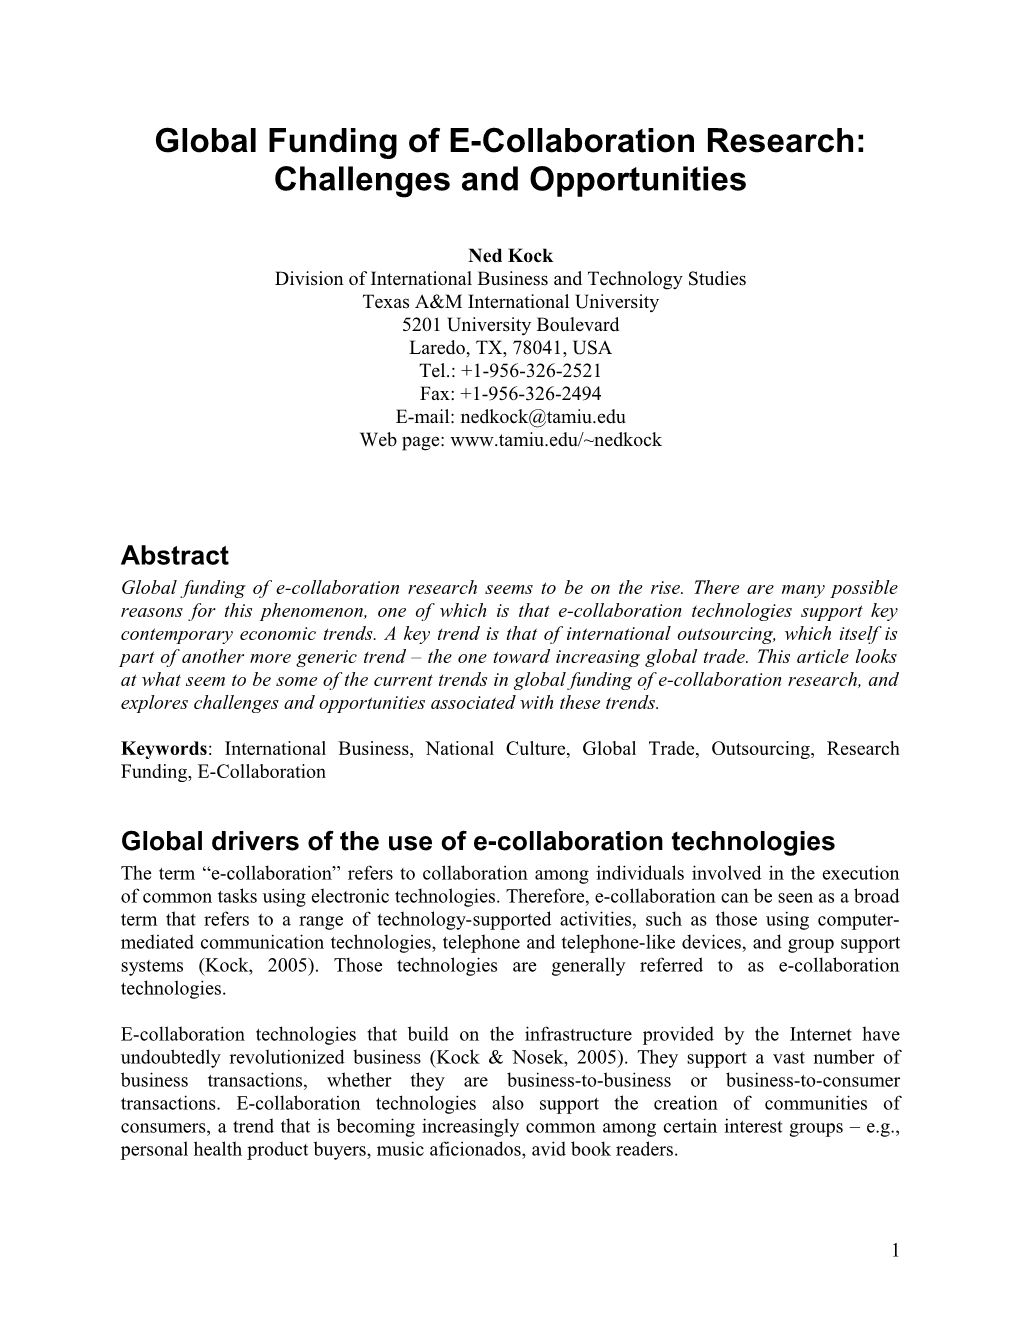 Government Funding of E-Collaboration Research in the European Union: a Comparison With